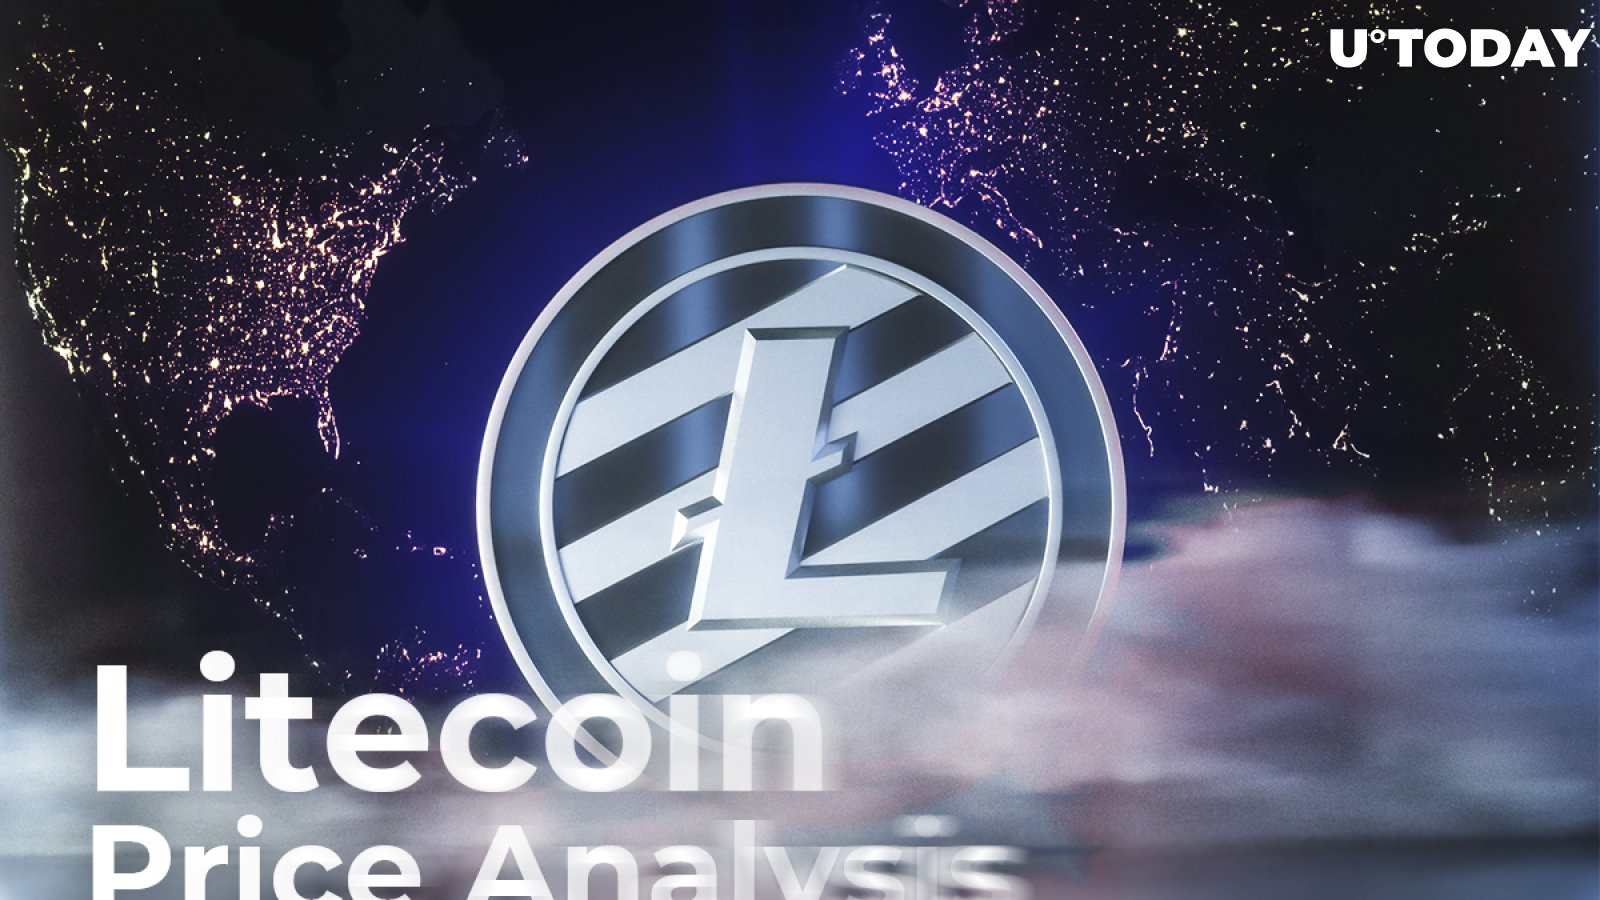 Litecoin Price Analysis — How Much Might LTC Cost in 2019-20-25?